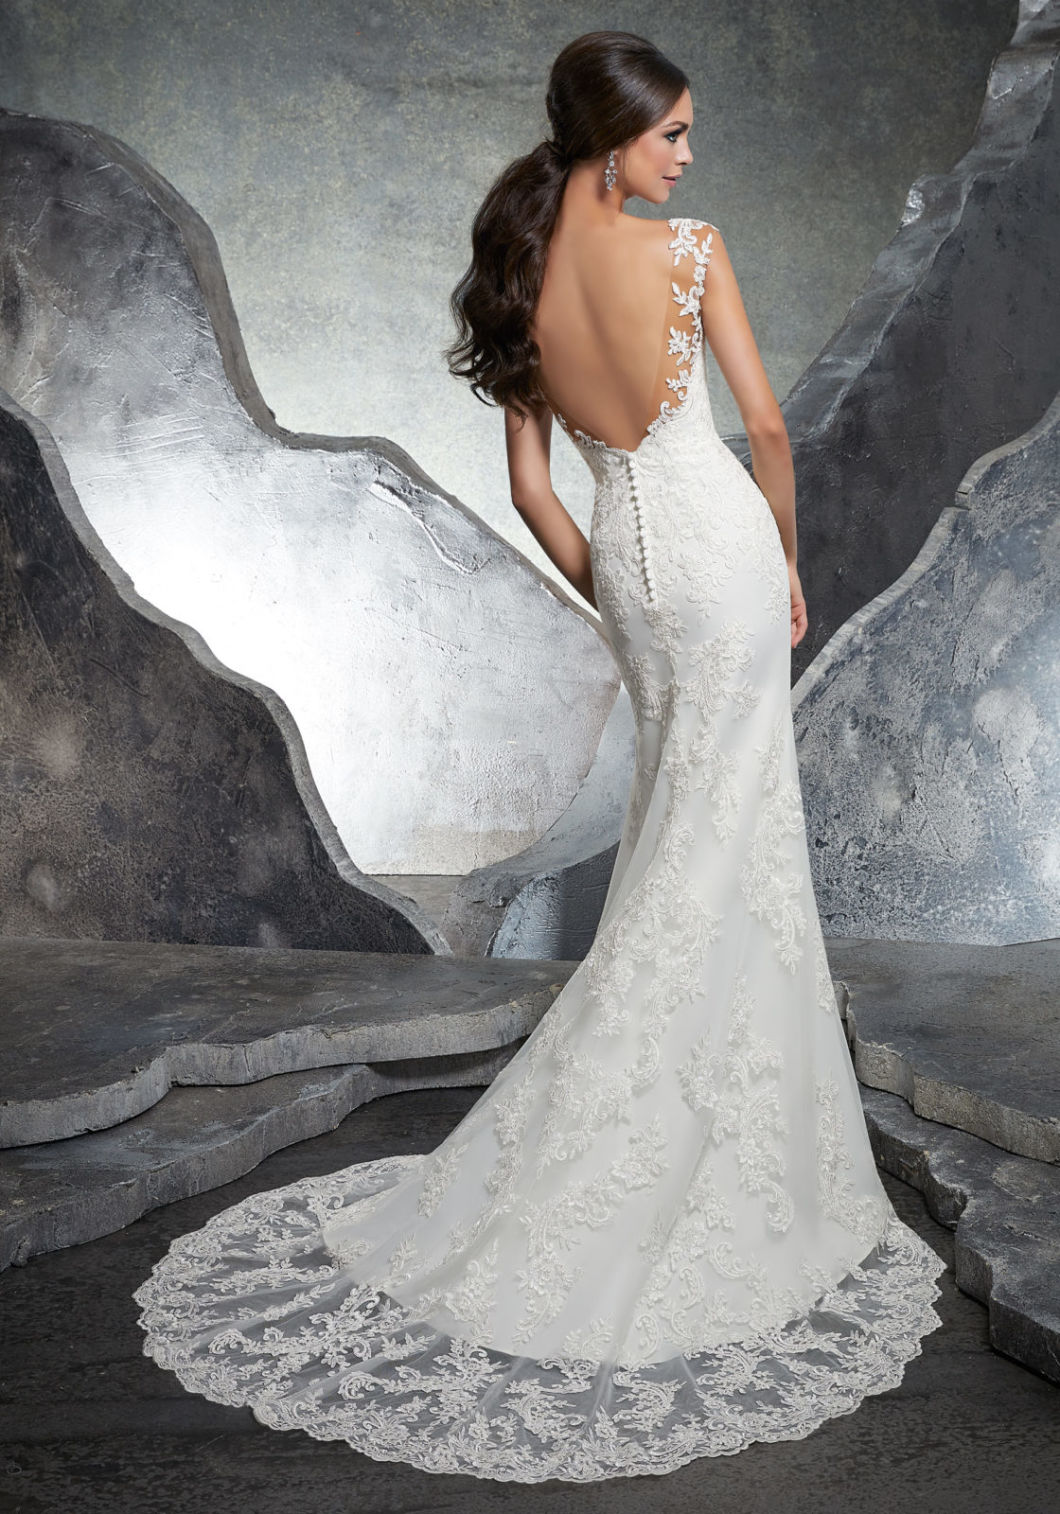 Applique Over Champagne Tulle Sleeveless Mermaid Wedding Dress W1471944